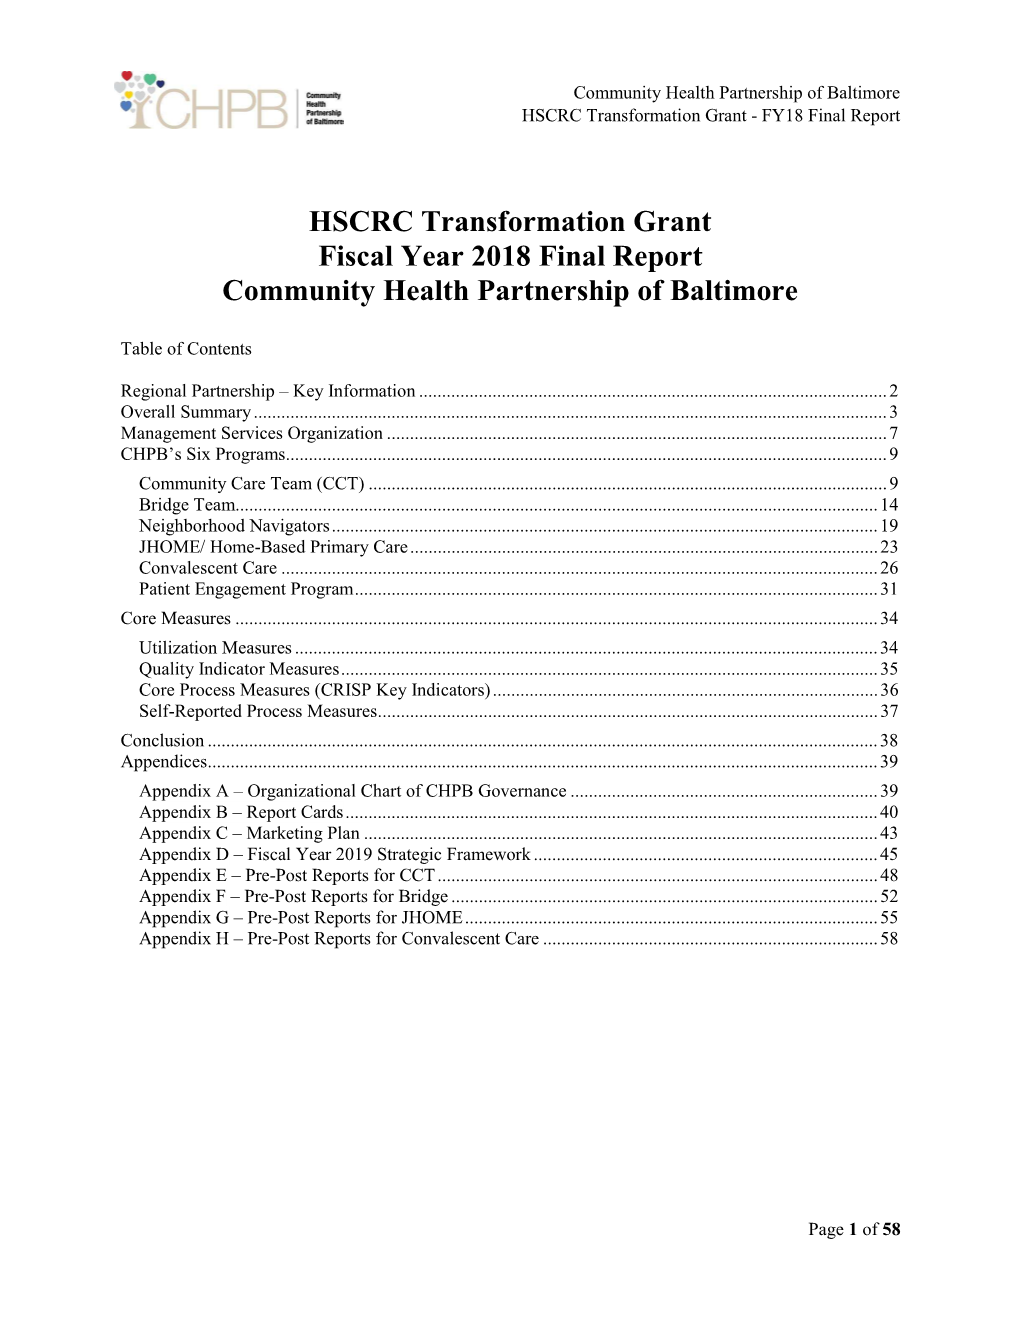 HSCRC Transformation Grant Fiscal Year 2018 Final Report Community Health Partnership of Baltimore